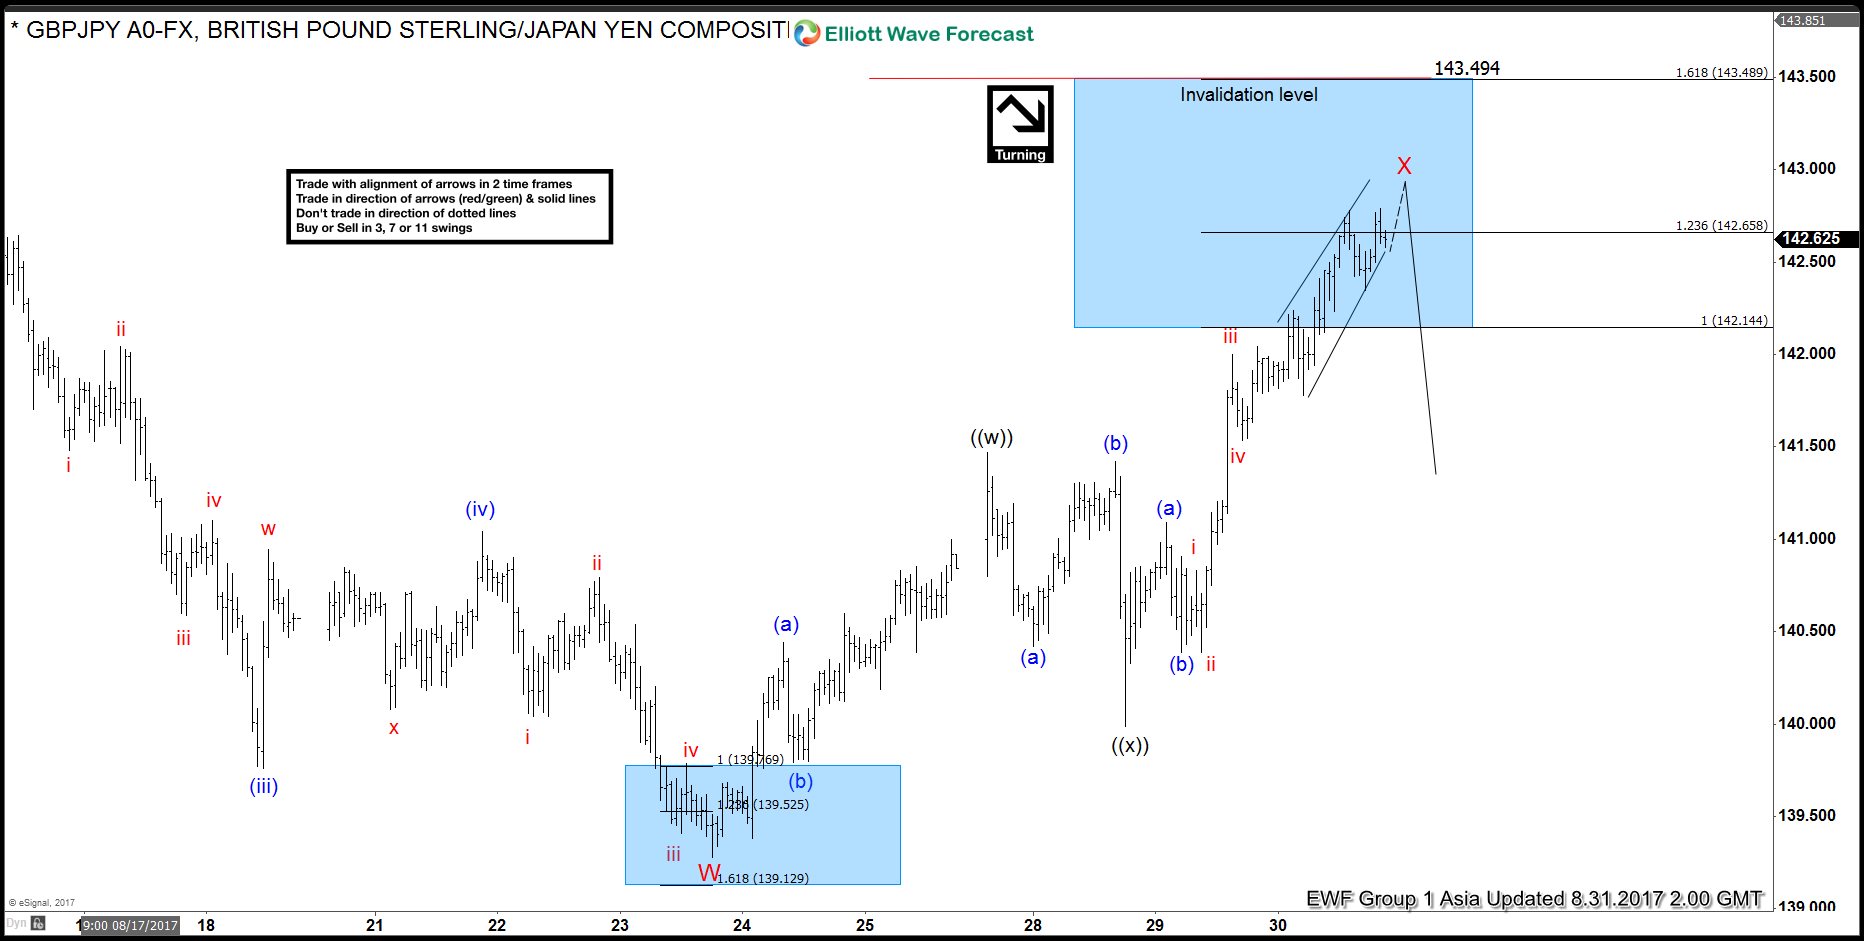 GBPJPY Elliott Wave View: Ending correction